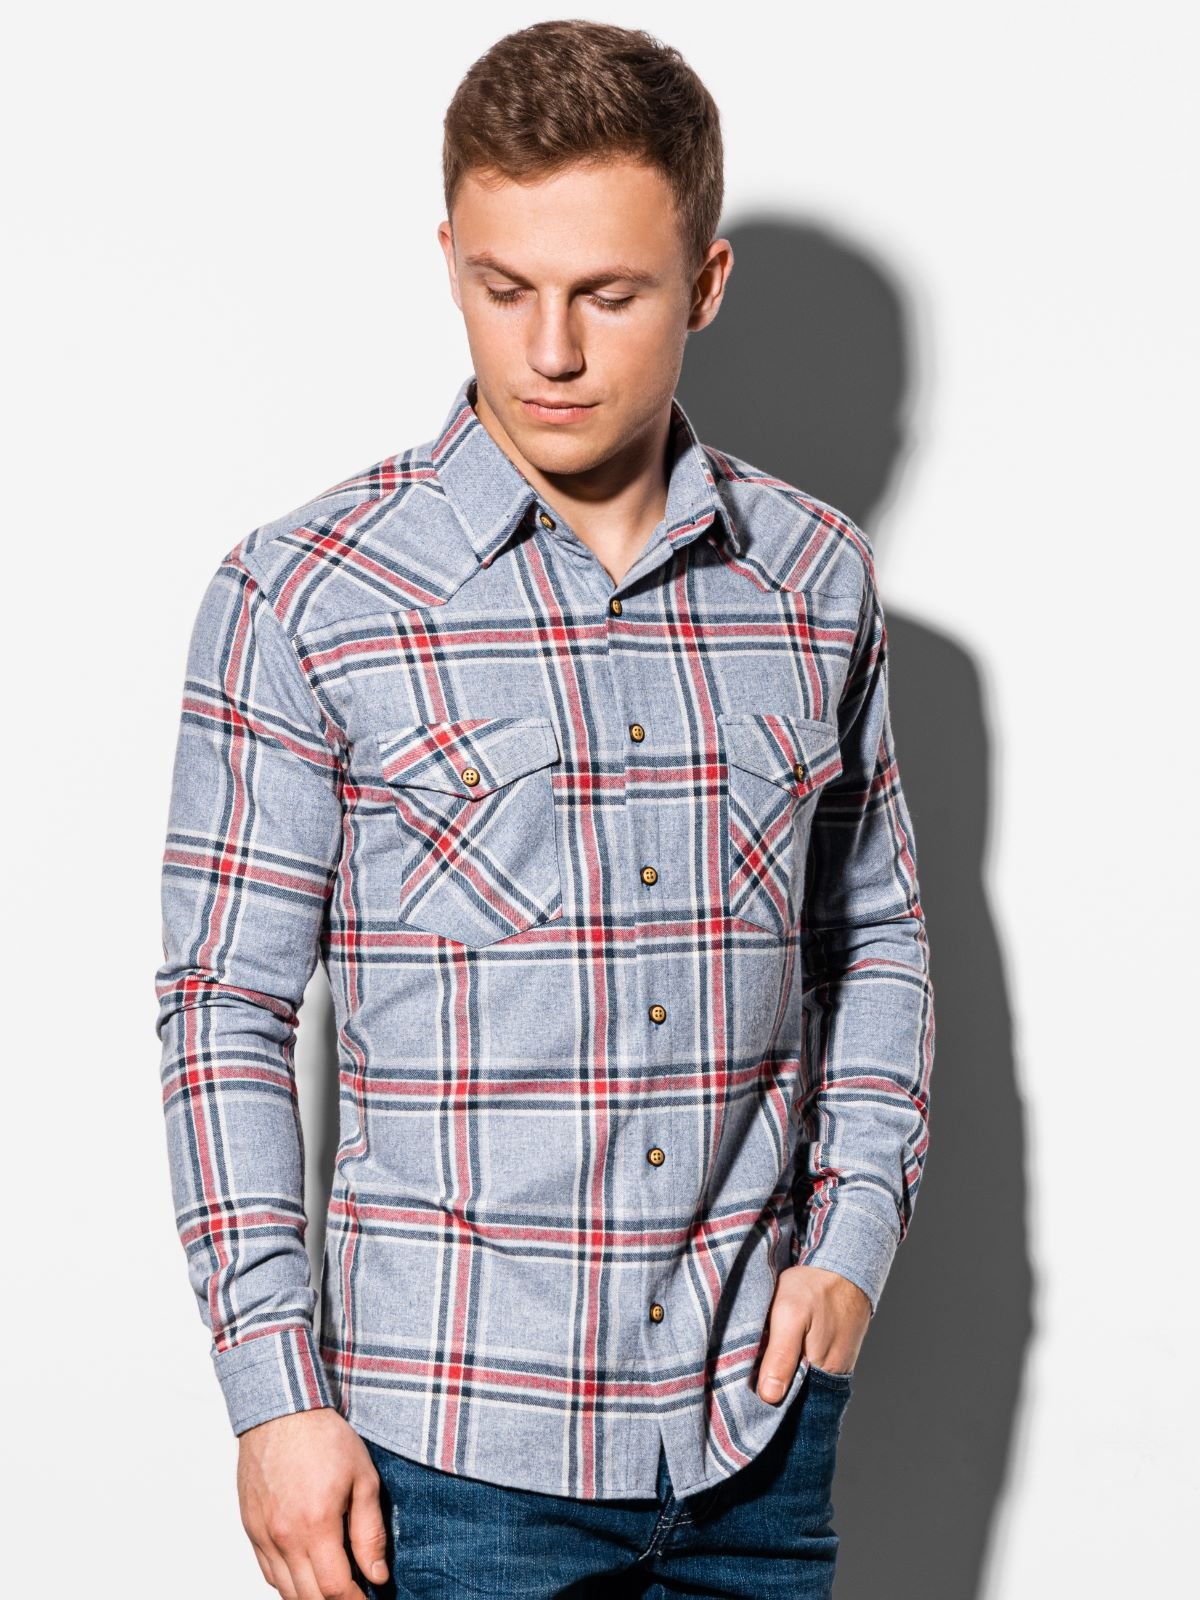 Men's shirt with long sleeves K510 - grey | MODONE wholesale - Clothing ...